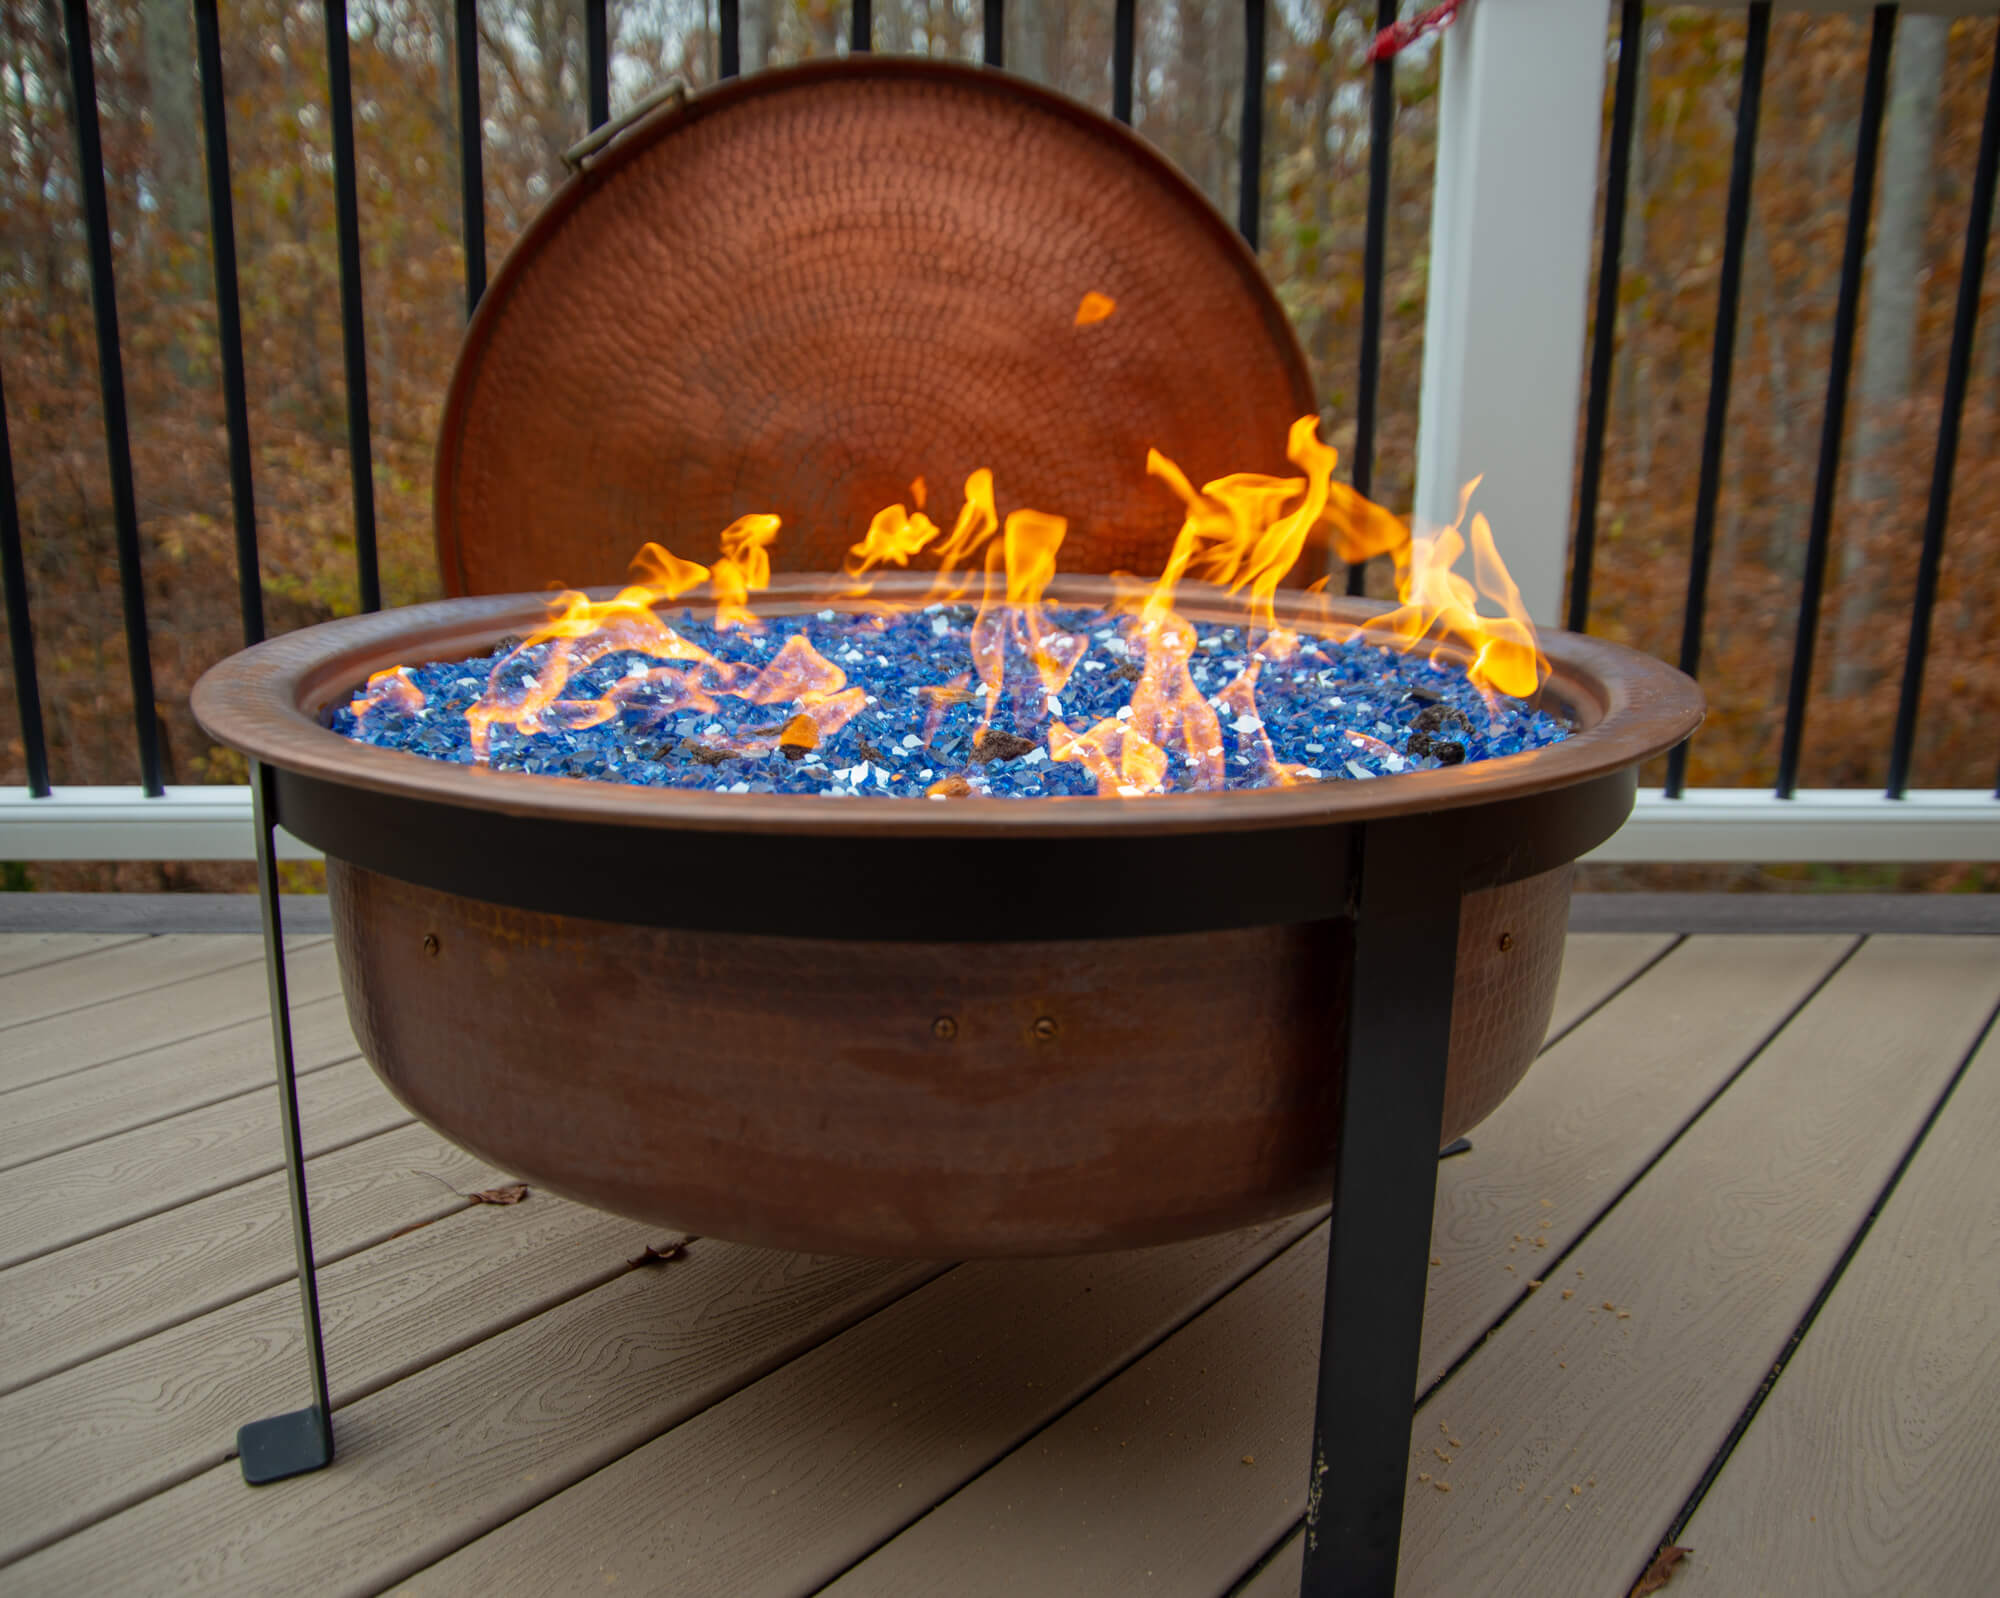 6 Ways To Put A Fire Pit On Wooden Deck, Is It Safe To Put A Propane Fire Pit On Deck